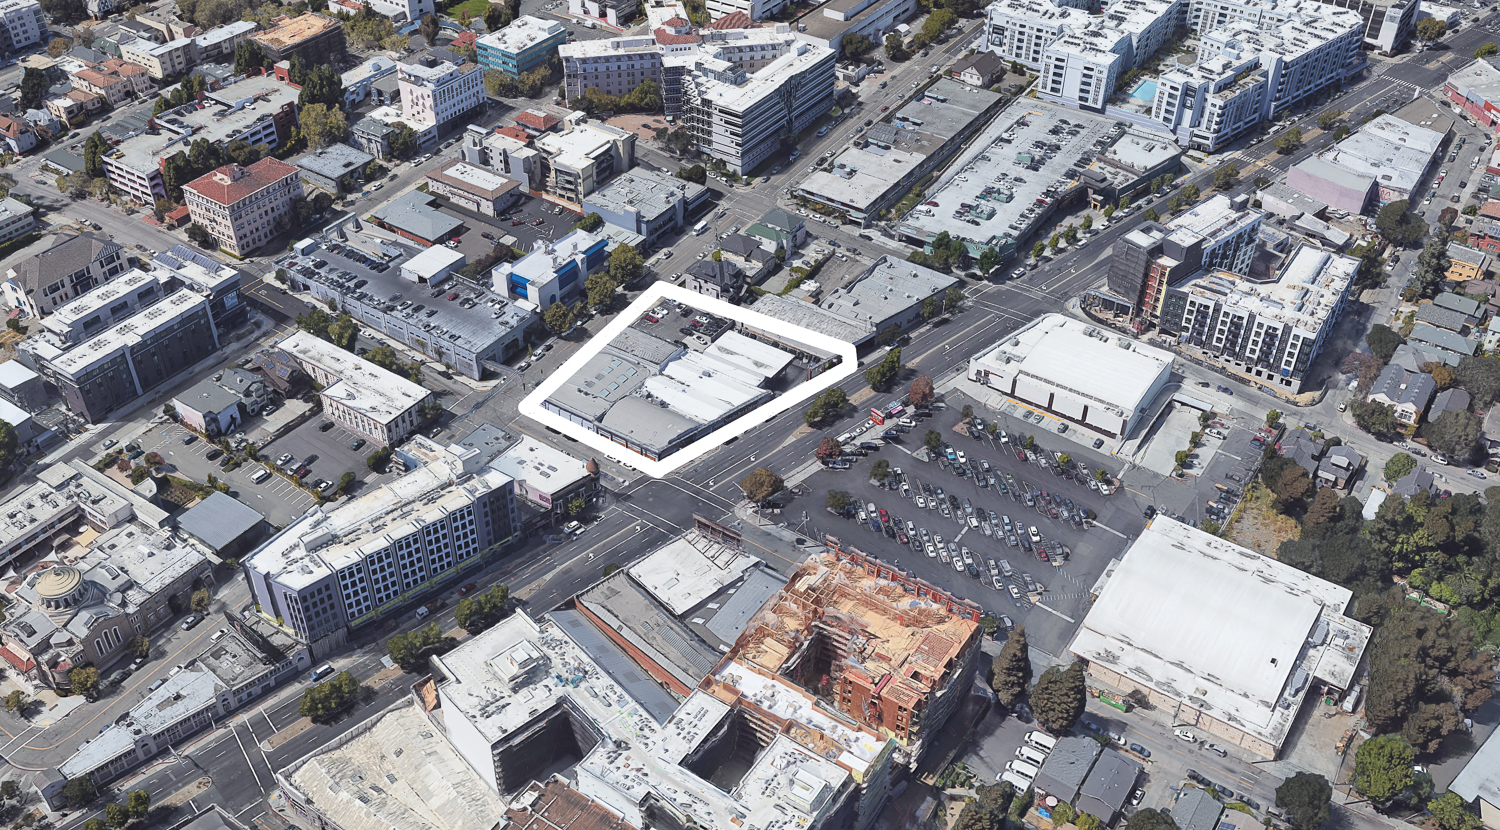 2901 Broadway property site outlined approximately by YIMBY, image via Google Satellite